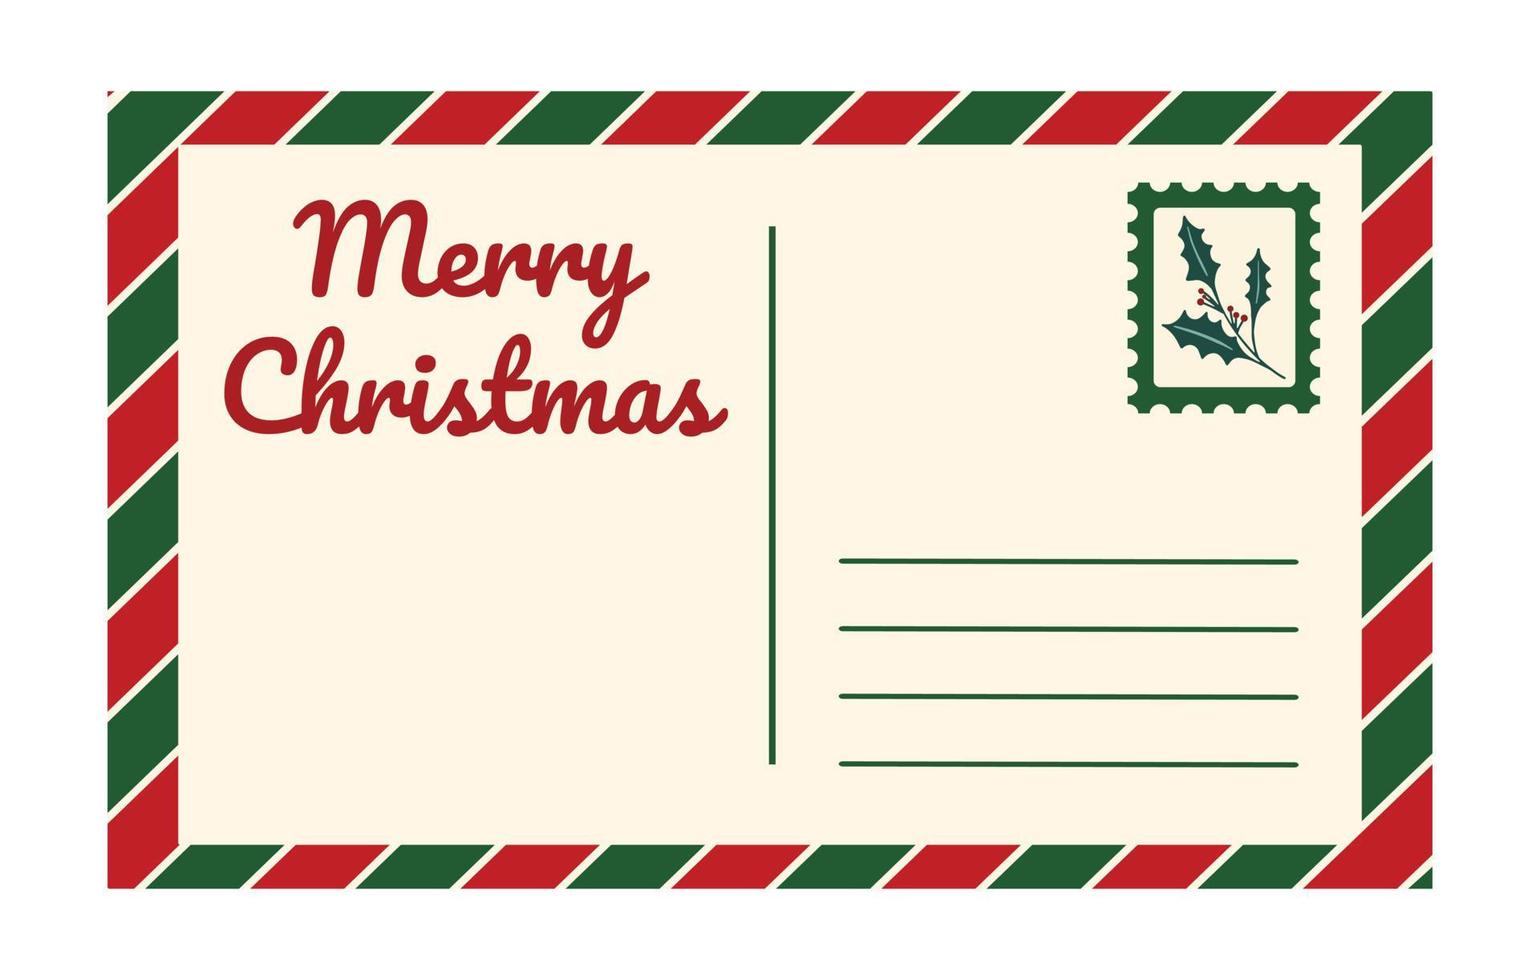 Vector vintage Christmas postcard template isolated on white background. Empty romantic old fashioned retro post card with text Merry Christmas